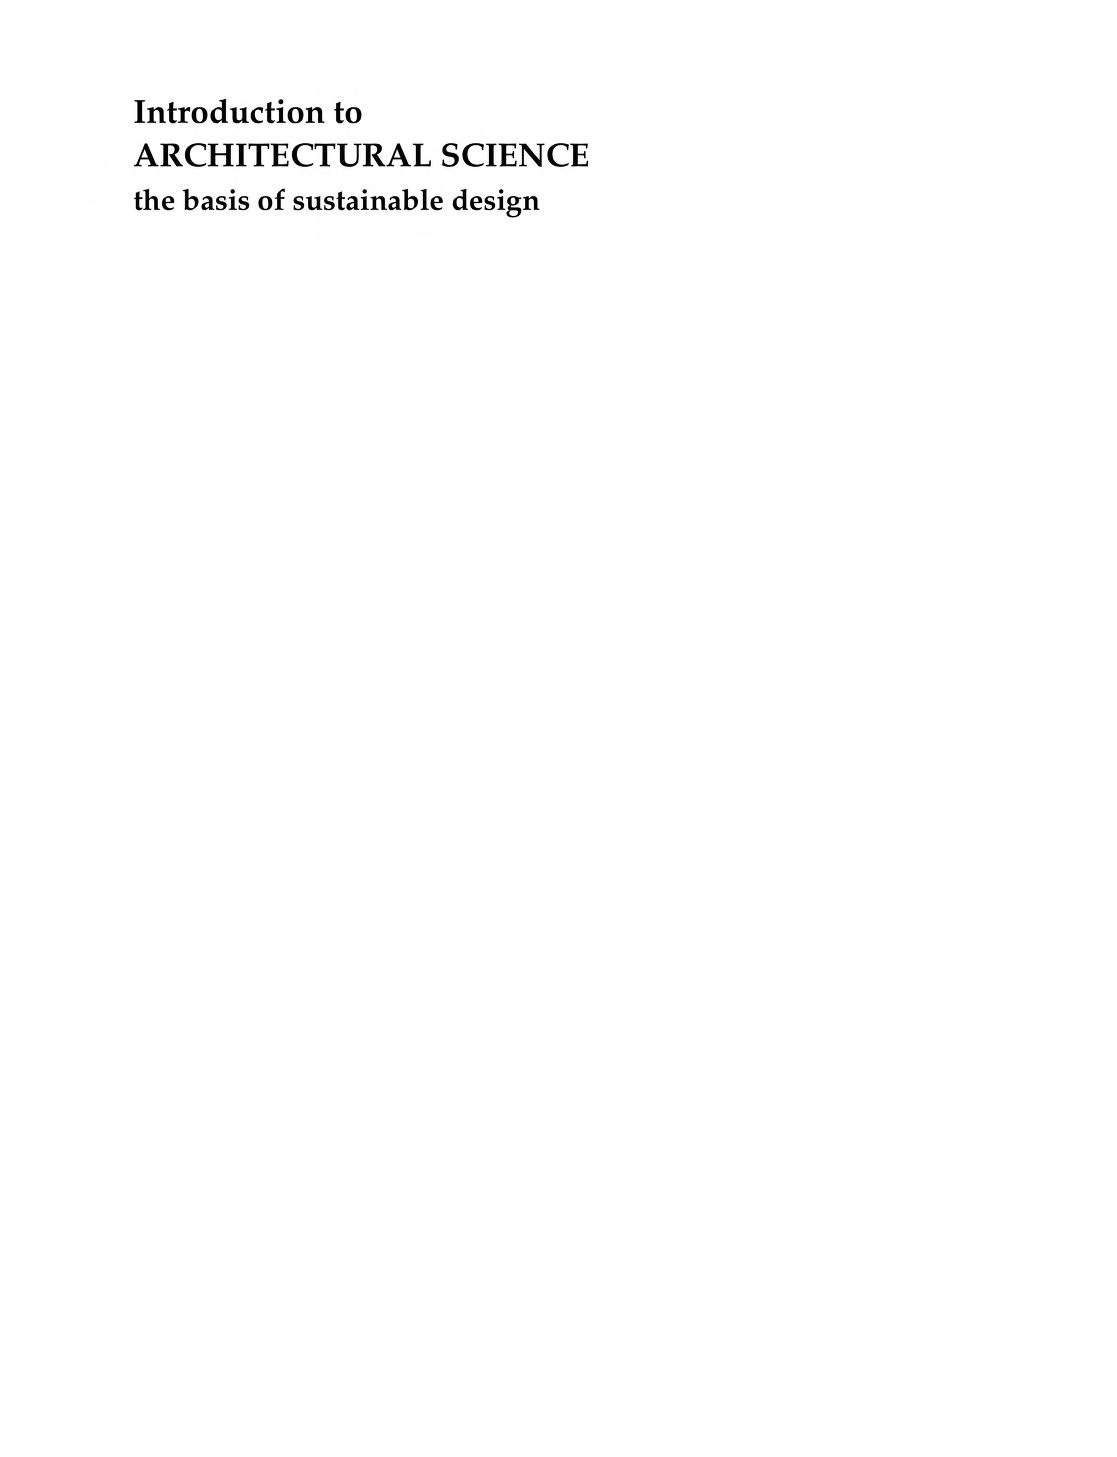 Introduction to Architectural Science - The Basis of Sustainable 